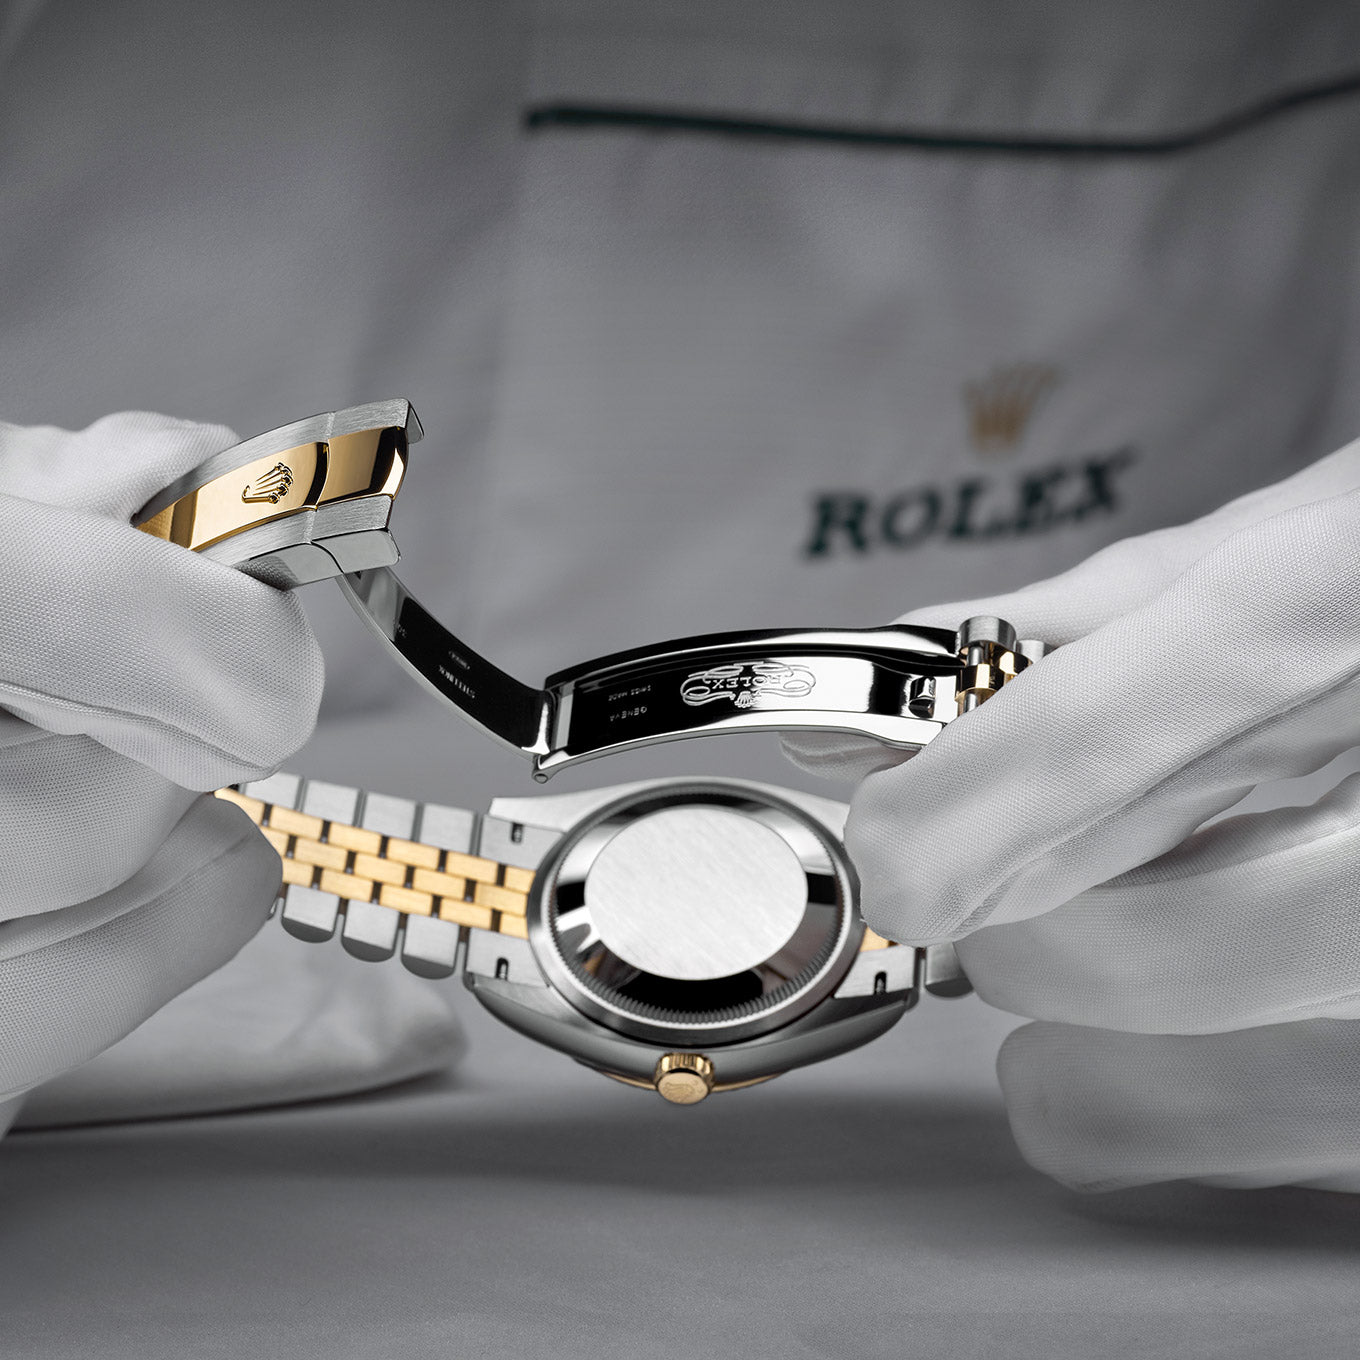 Rolex watch being inspected by a certified professional